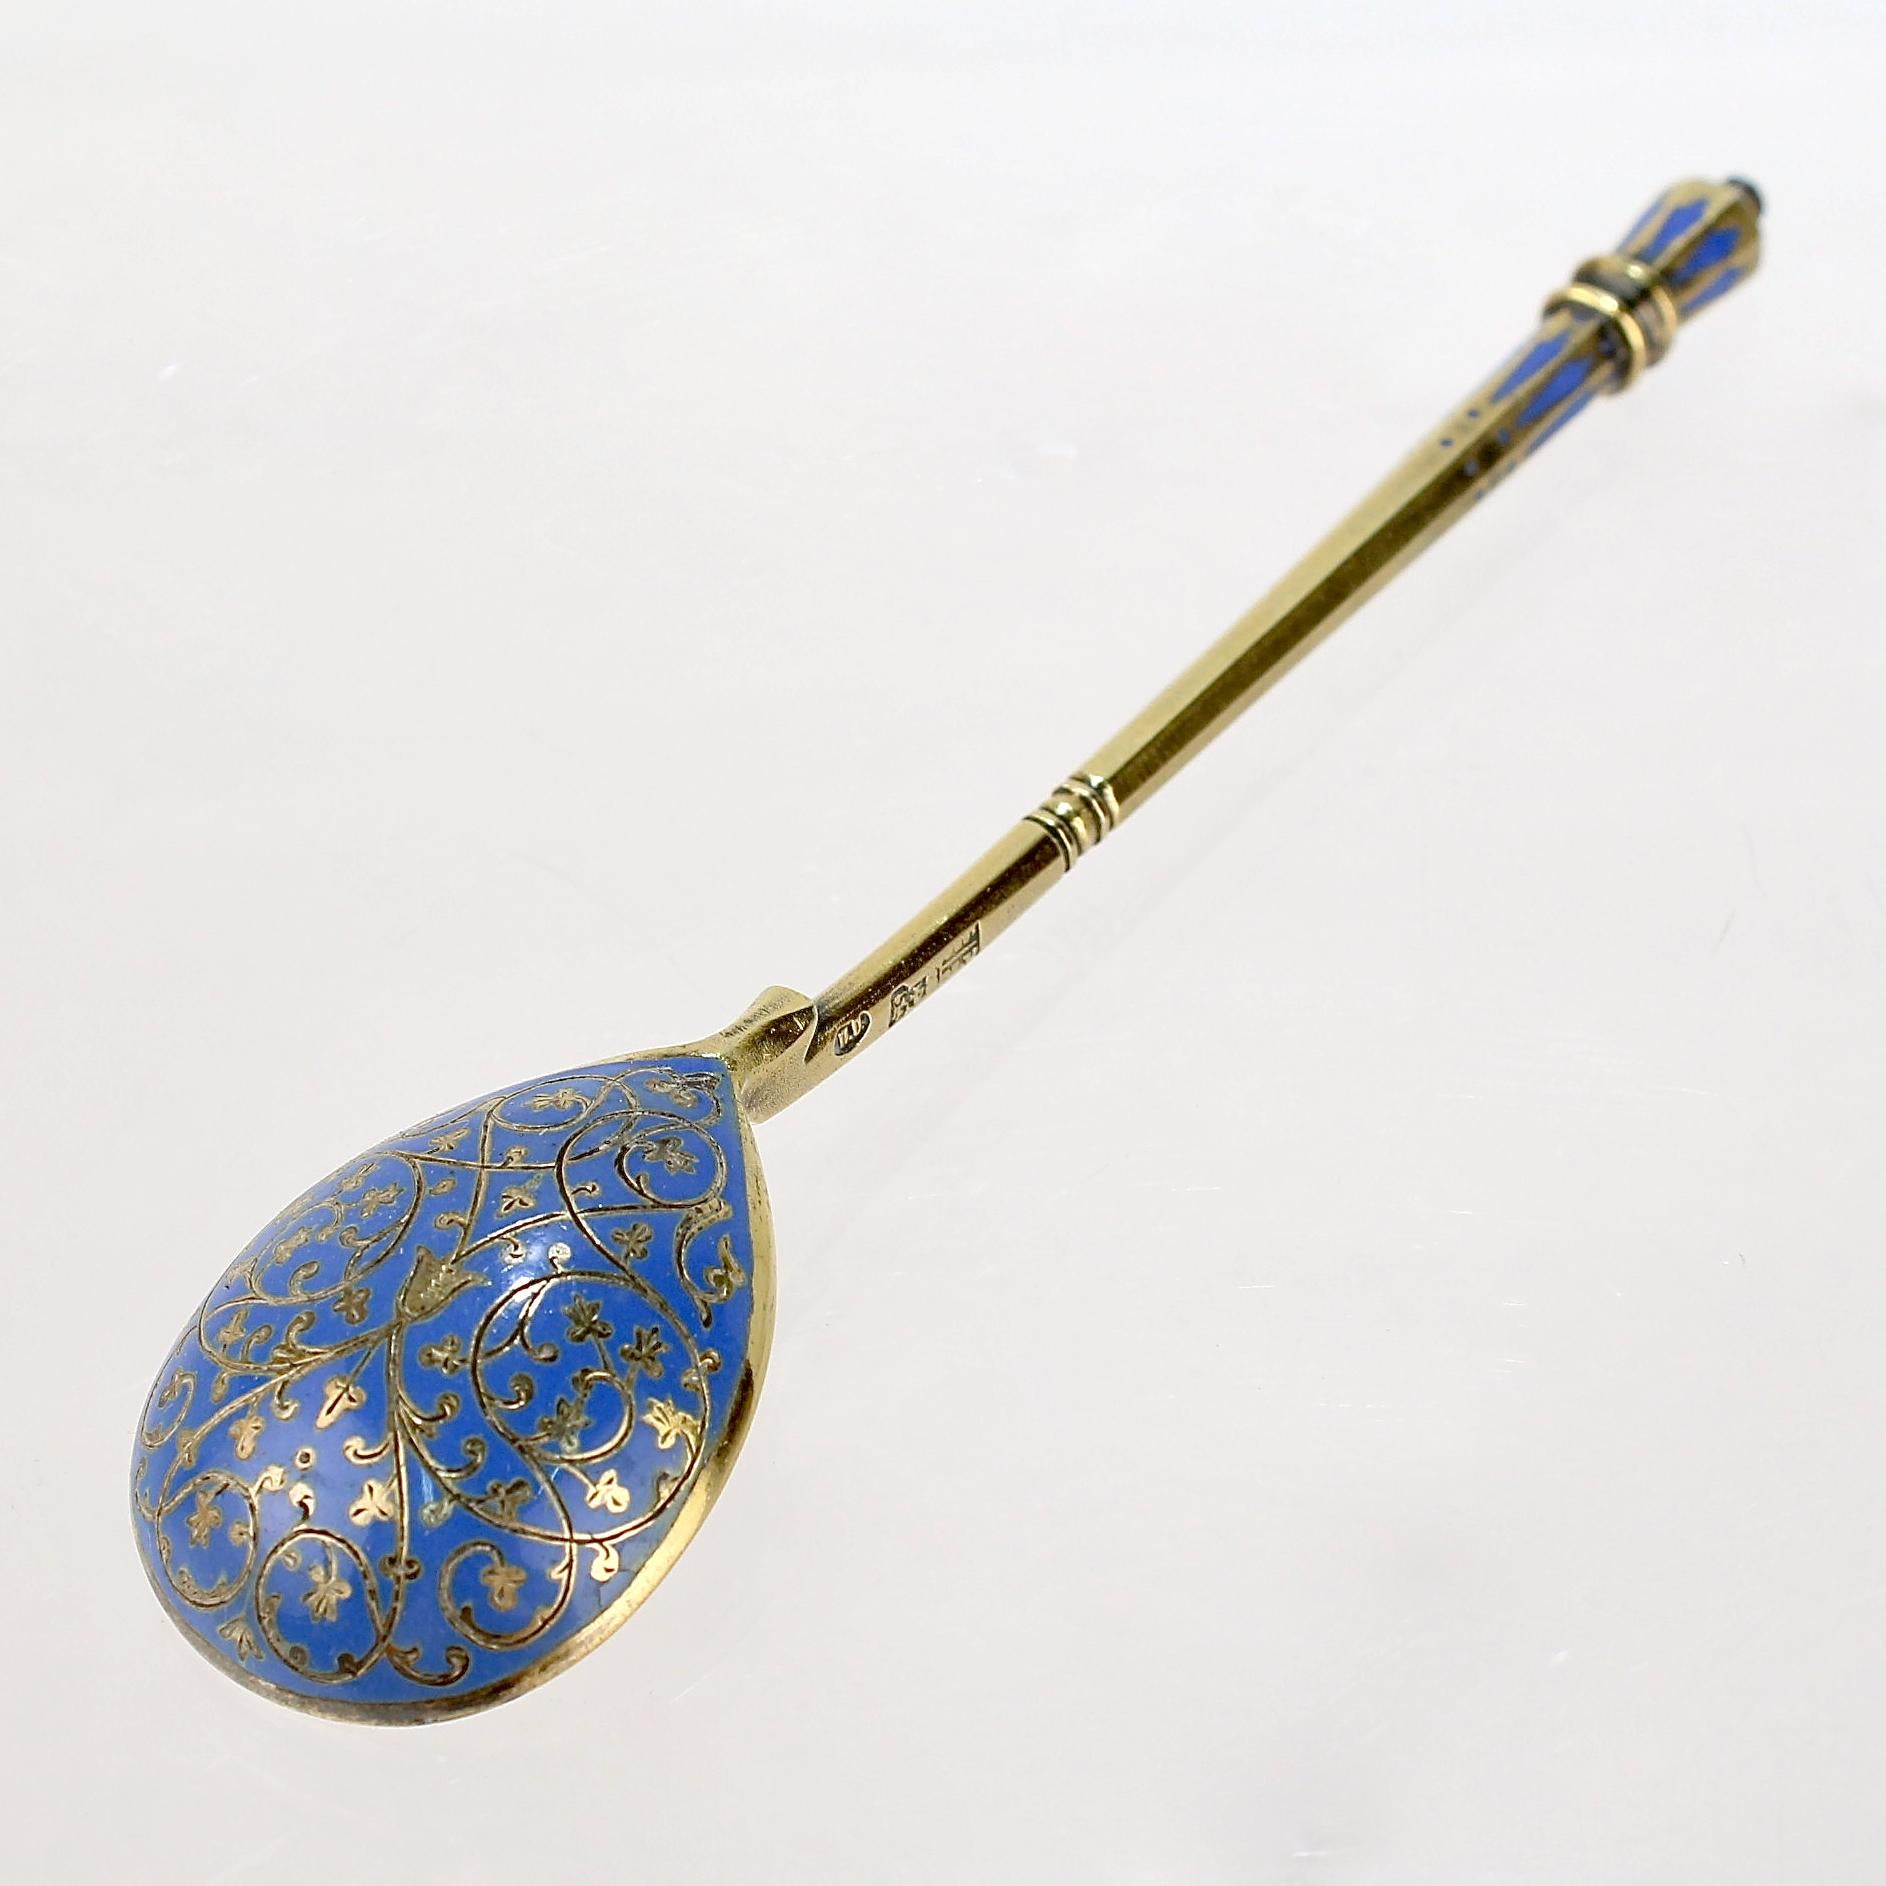 A very fine antique Russian tea or kvosh spoon.

By Pavel Ouchinnikov

With polychrome shaded cloisonné enamel decoration to both the front and reverse.

Simply a wonderful piece of Imperial Russian silver!

Date:
Late 19th or Early 20th